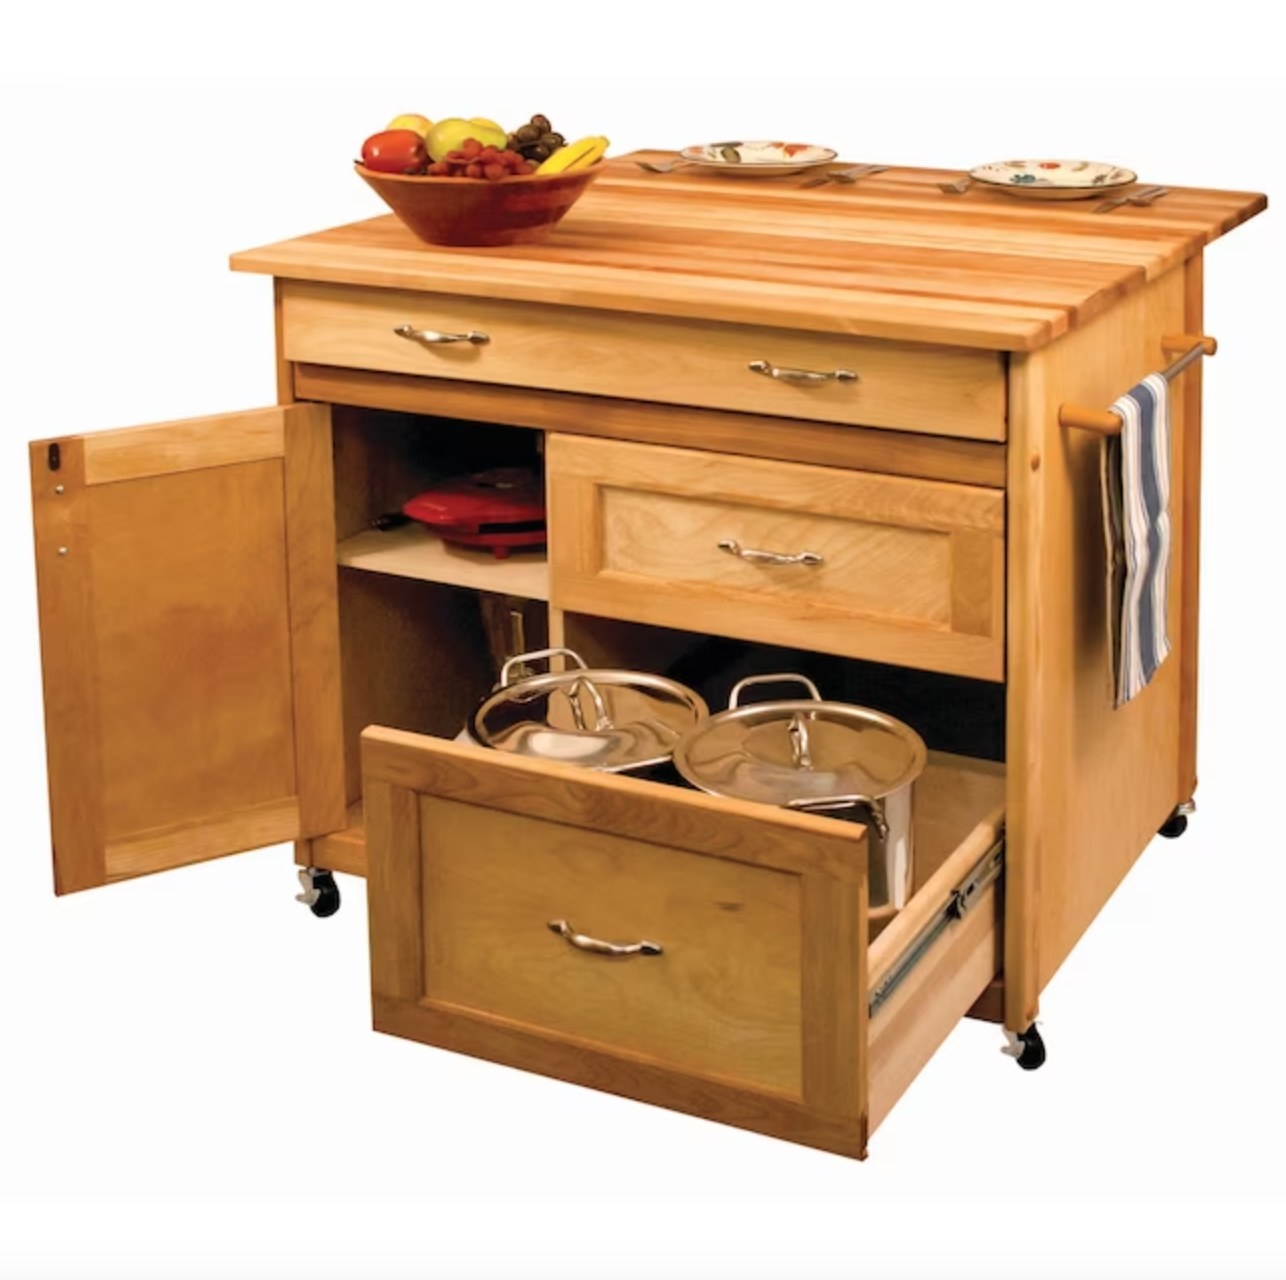 the light wooden kitchen island with several drawers open showing pots and pans